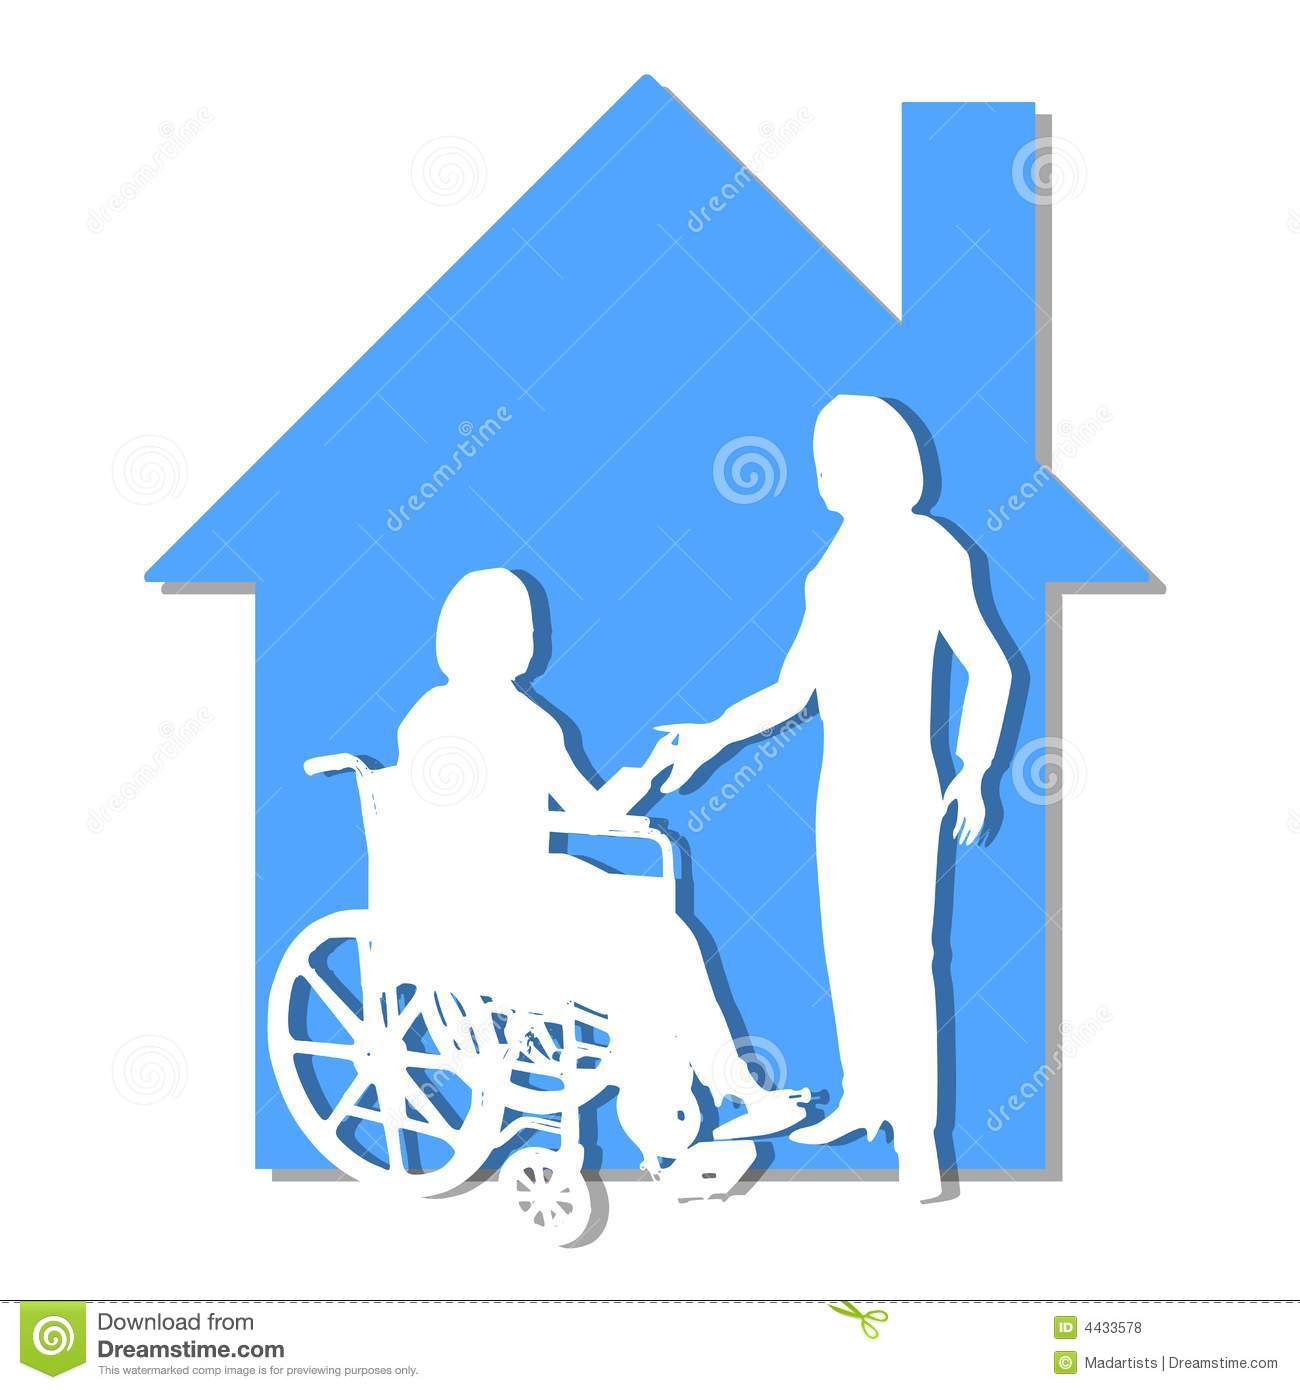 Home Healthcare Care Support Royalty Free Stock Photos   Image